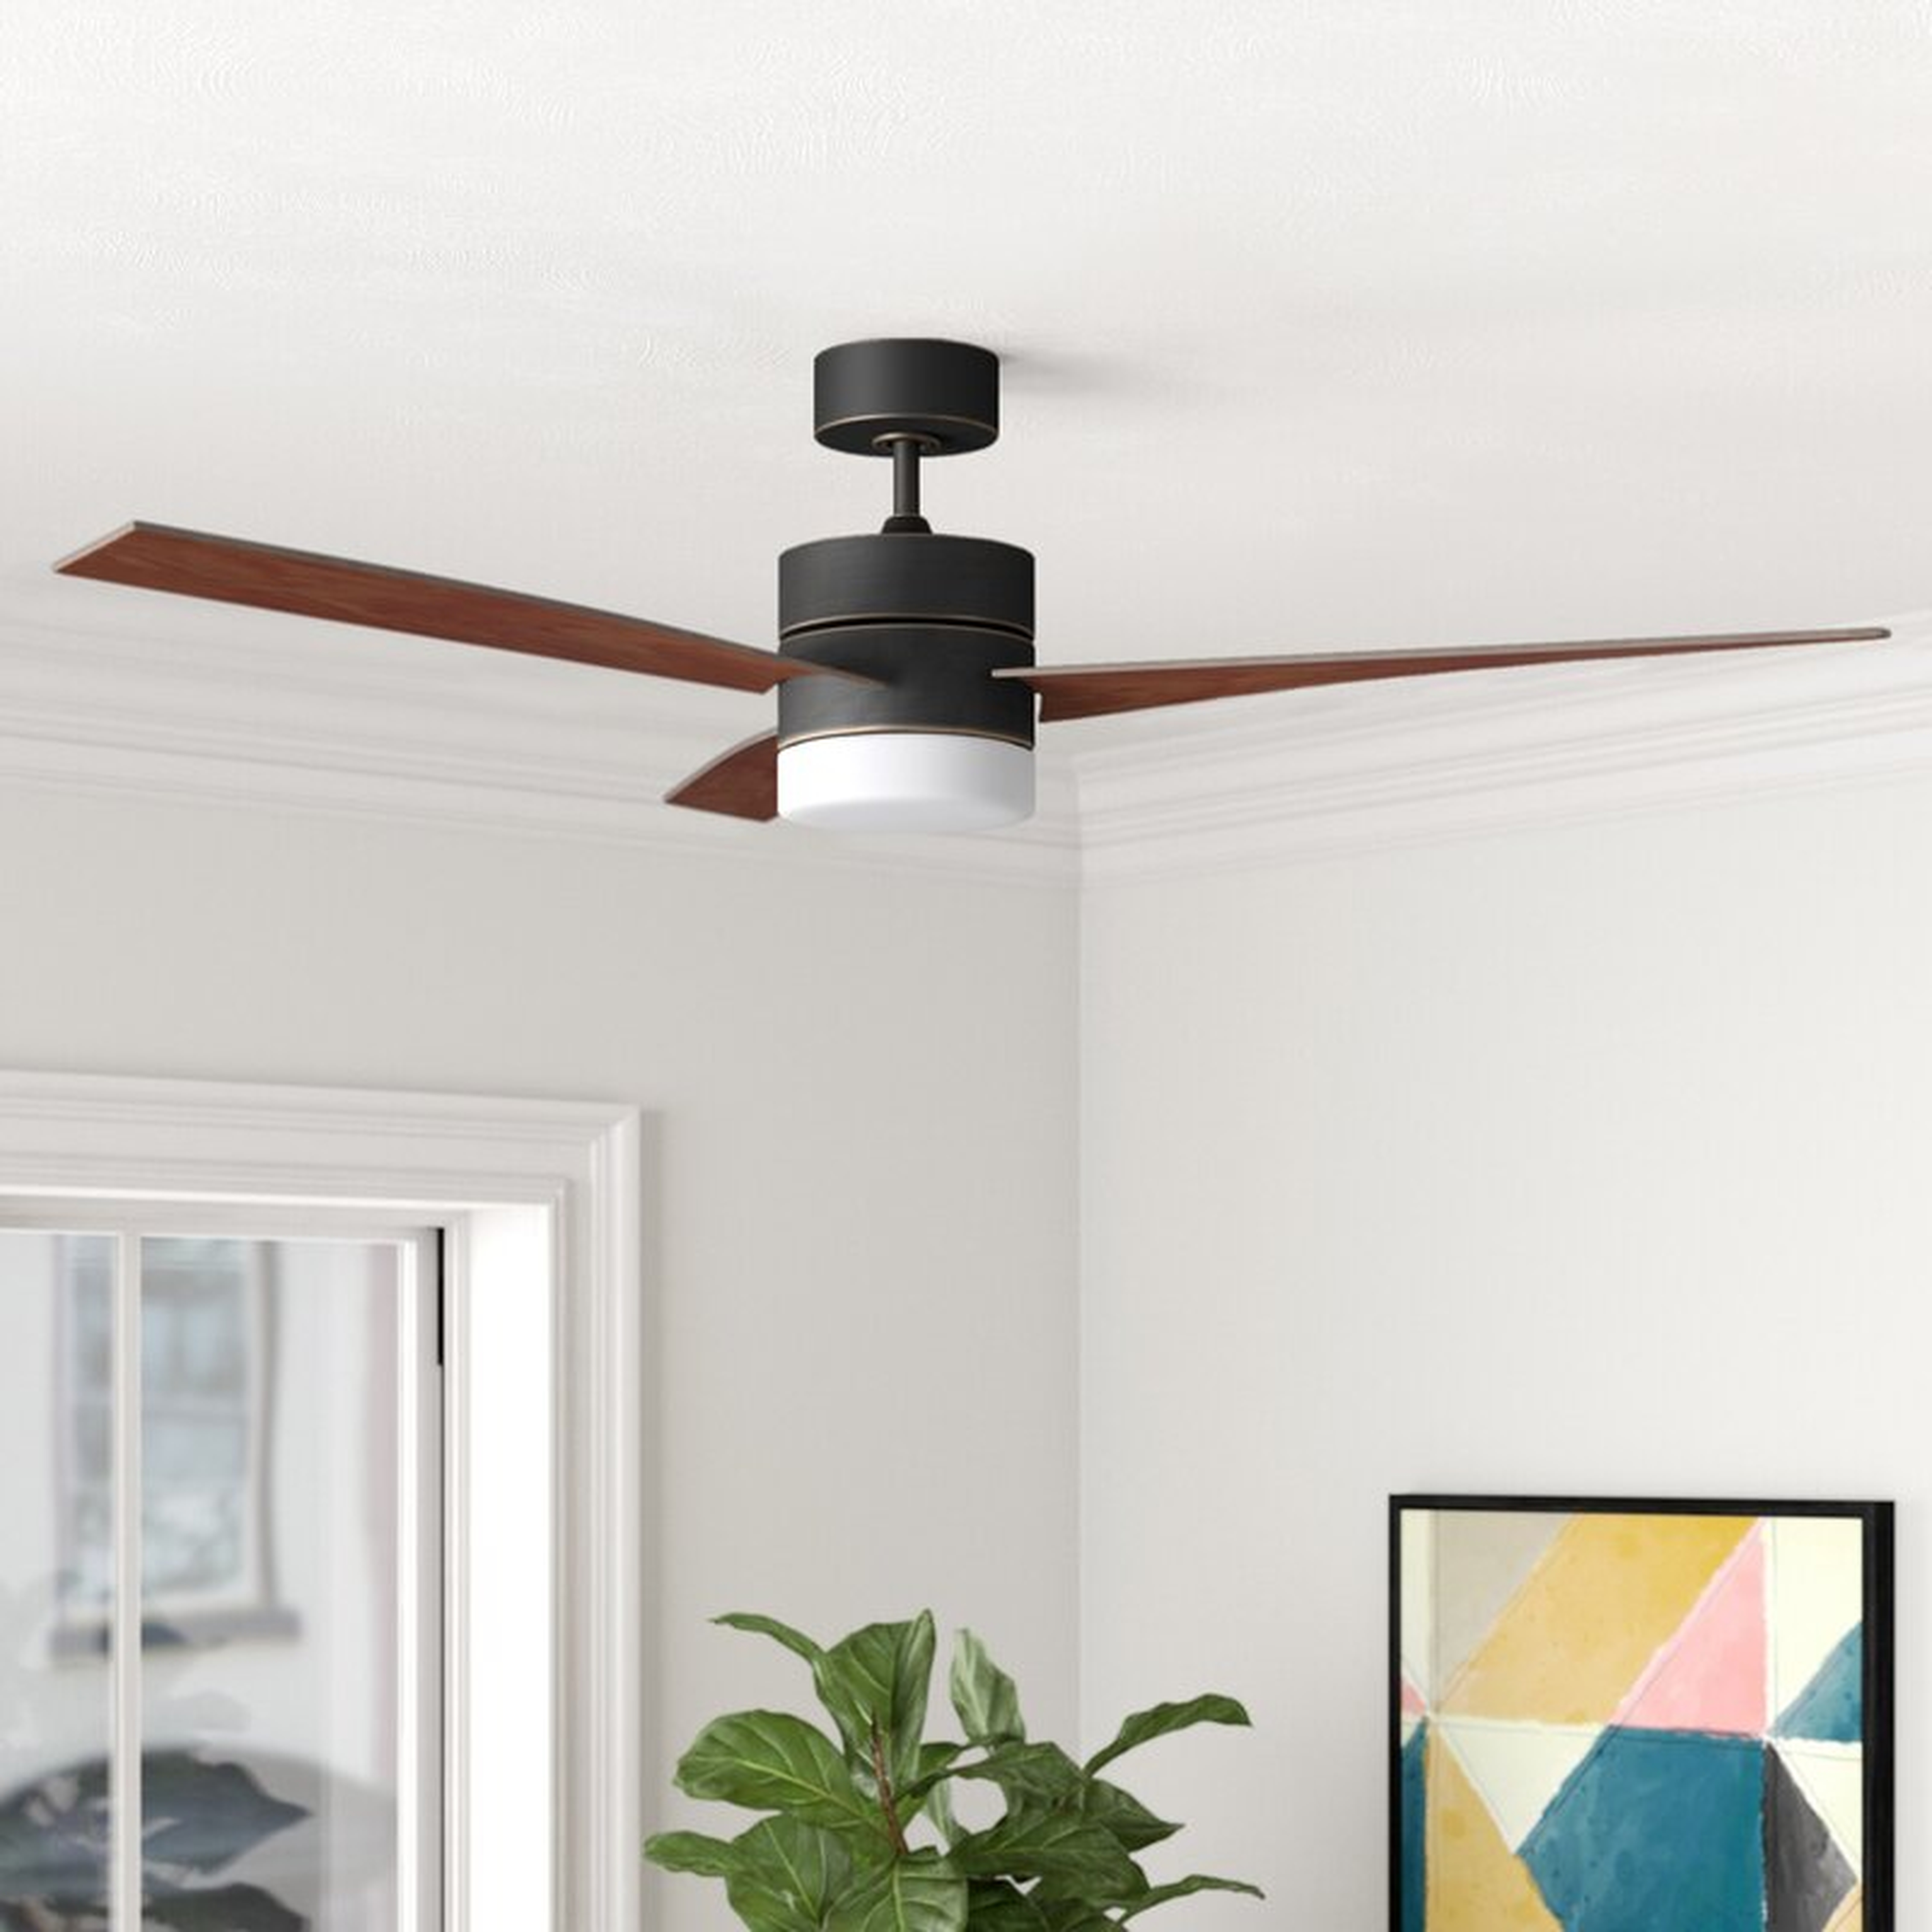 52" Alex 3 - Blade LED Standard Ceiling Fan with Remote Control and Light Kit Included - Wayfair